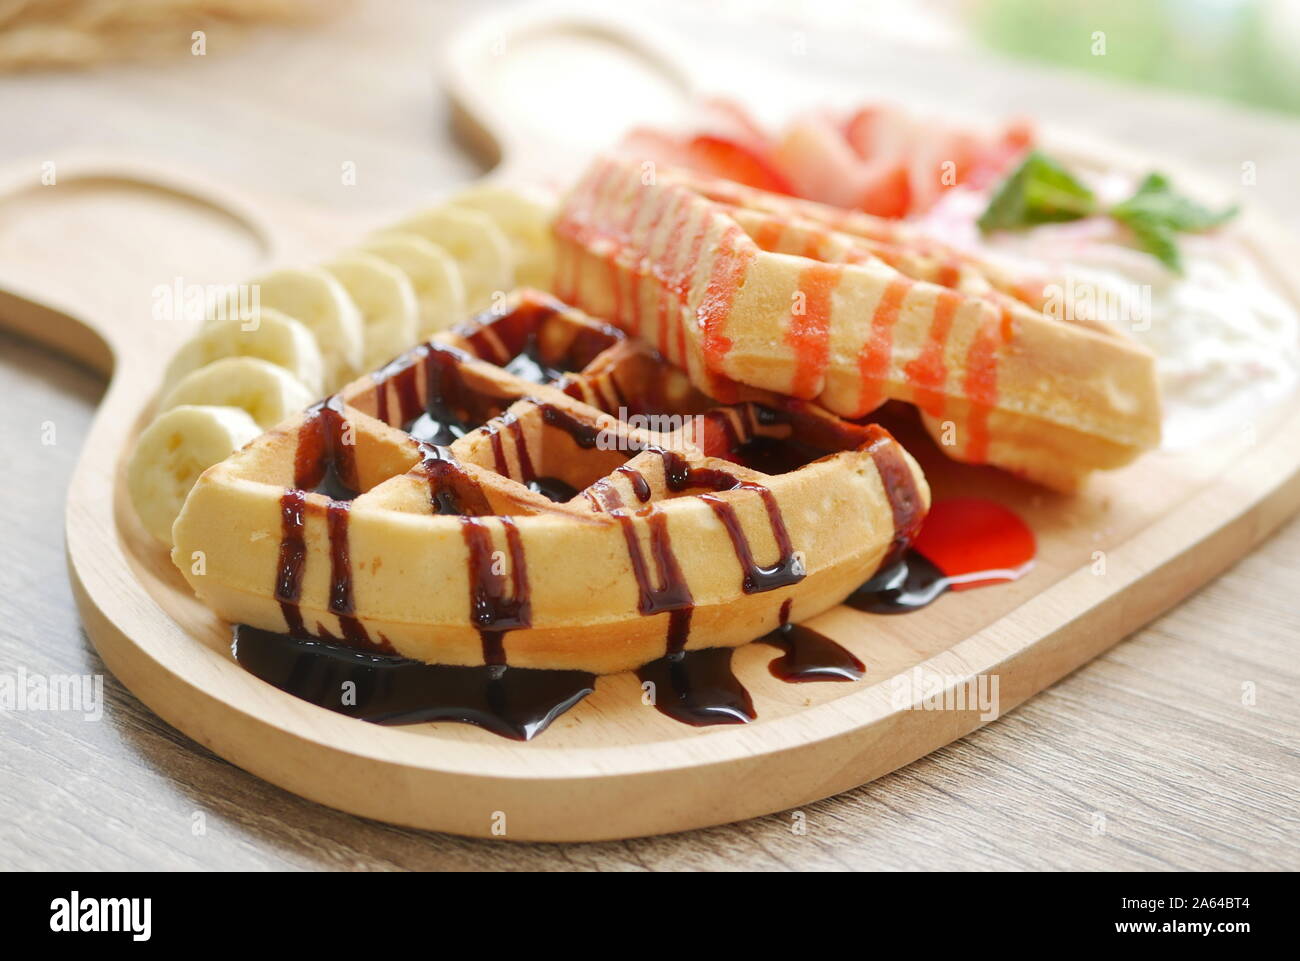 tasty waffle topped with strawberry syrup and chocolate sauce, side dishes are fresh strawberry chopped , banana , whipped cream and ice cream served Stock Photo